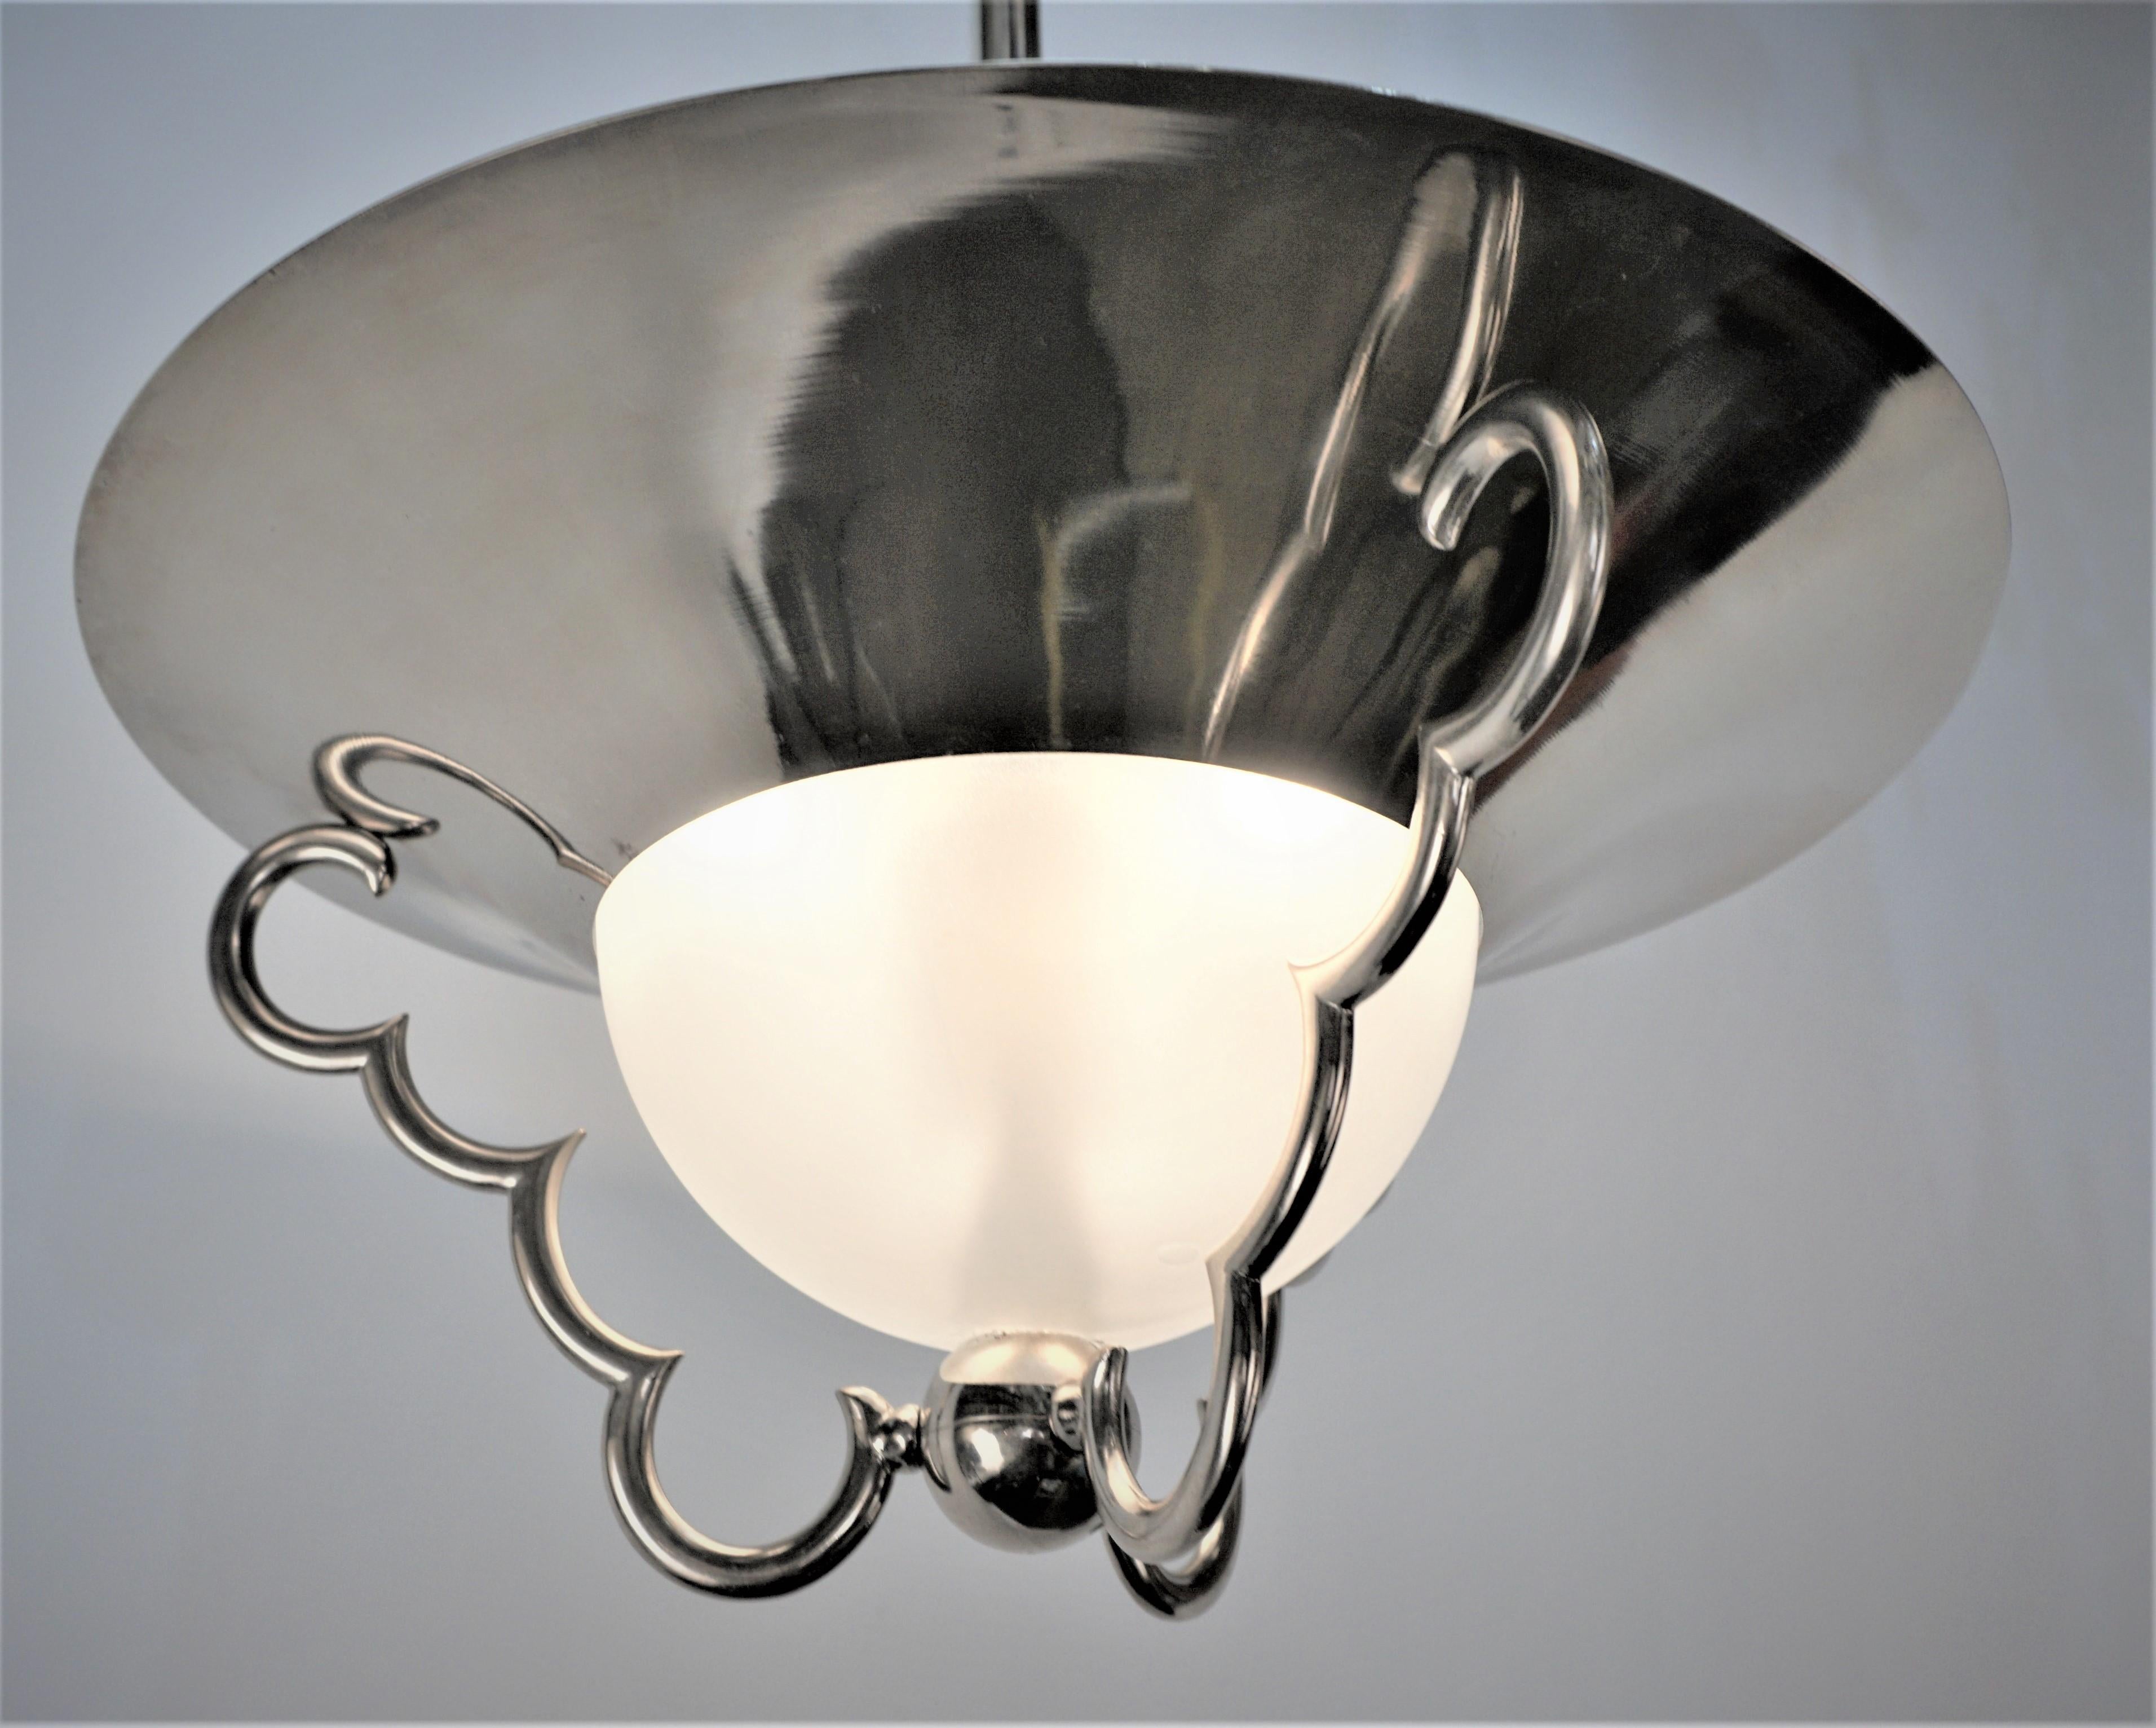 1970's Modern three light nickel frame with clear frost center glass chandelier.
75 watts max each light.